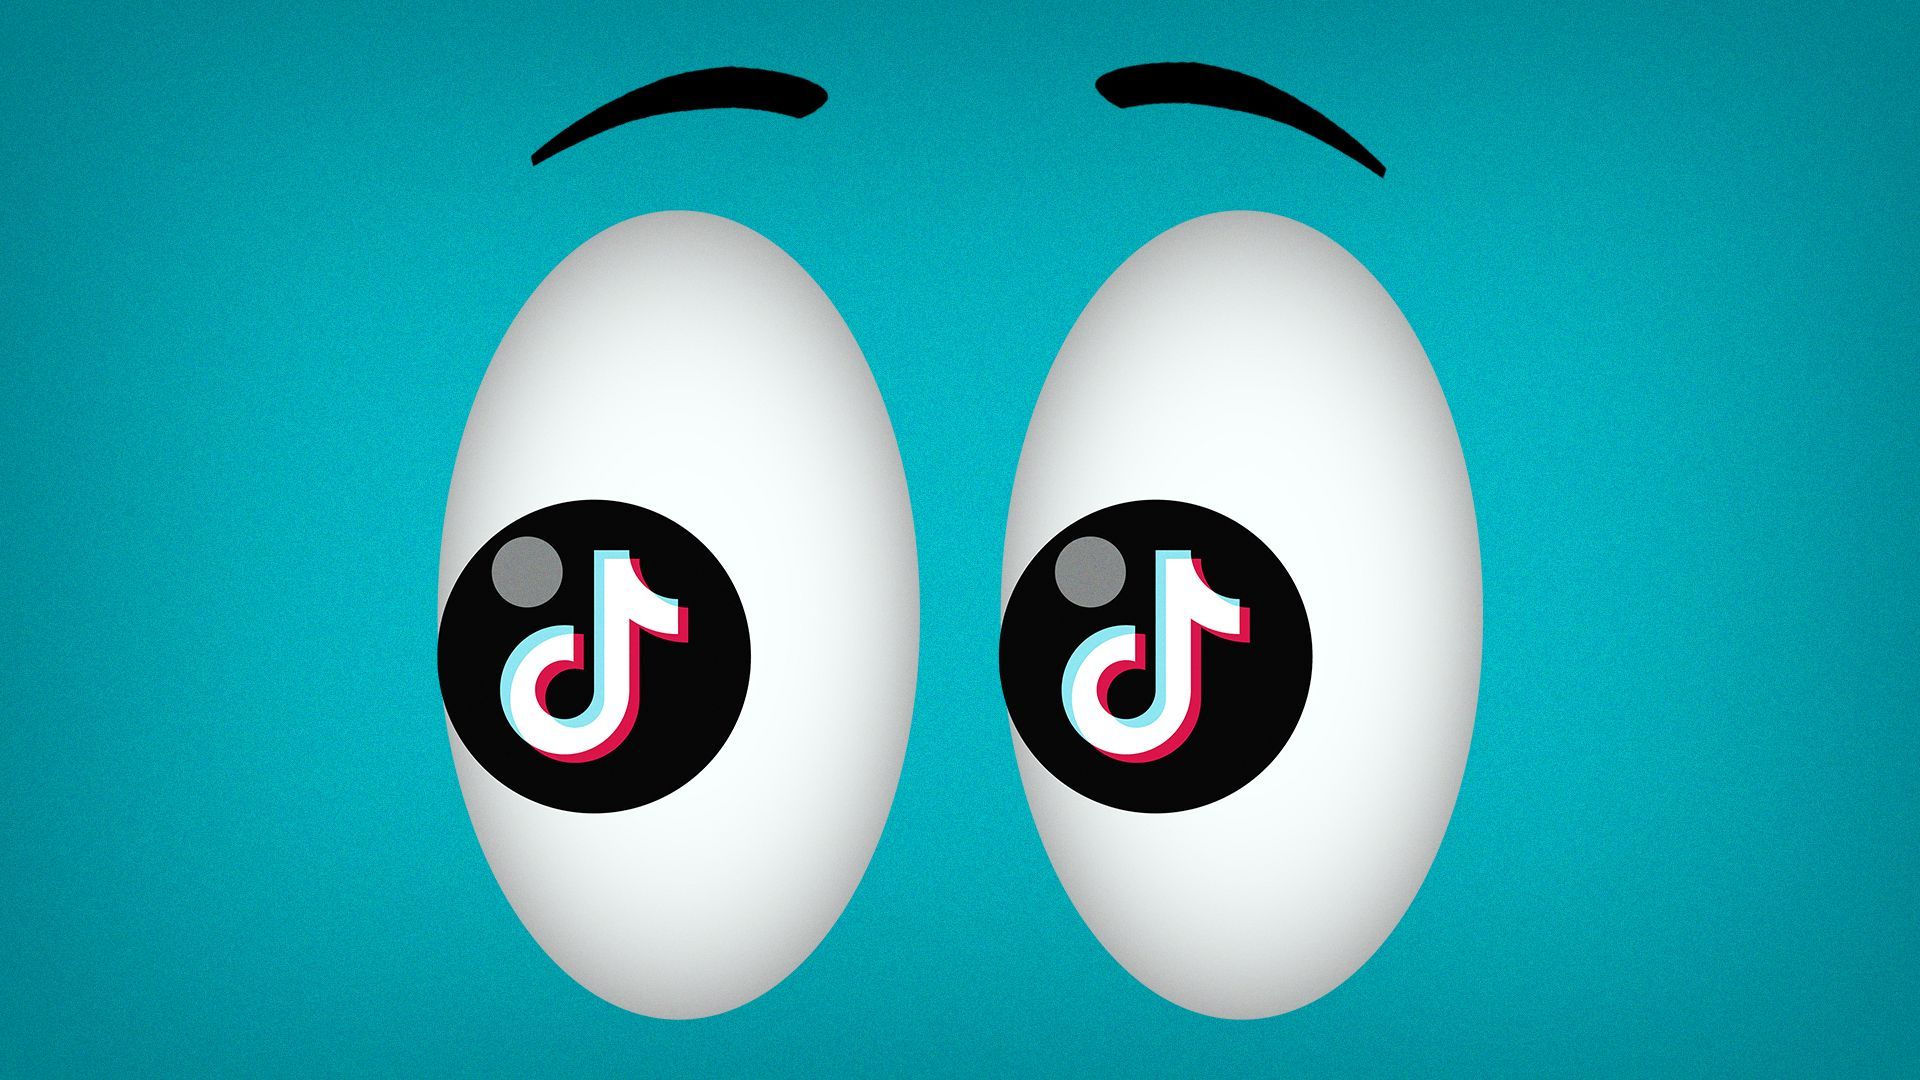 Illustration of the eyes emoji with the Tik Tok logo as the pupils.